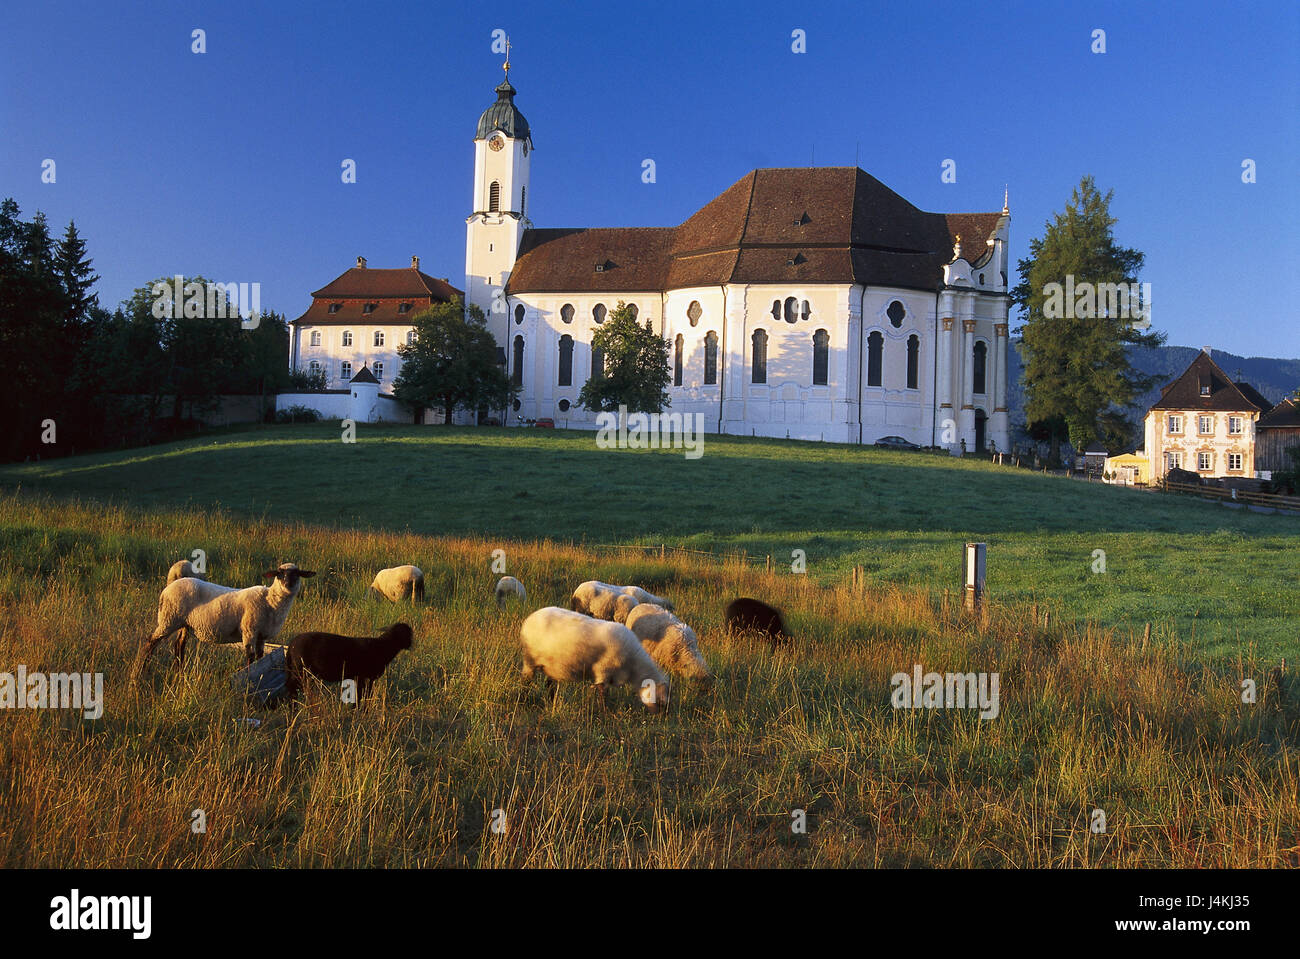 Germany, Bavaria, priest's angle, Wieskirche, meadow, sheep, eat Europe, Upper Bavaria, pilgrimage church to the castigated Savior on the showing, church, parish church, church, faith, religion, Christianity, structure, architecture, architectural style, builds in 1745-54, architect Dominiku Zimmermann, UNESCO-world cultural heritage, landmark, place of interest, pasture, mammals, benefit animals, cattle, cattle economy, keeping of pets, appropriate to the species, agriculture Stock Photo